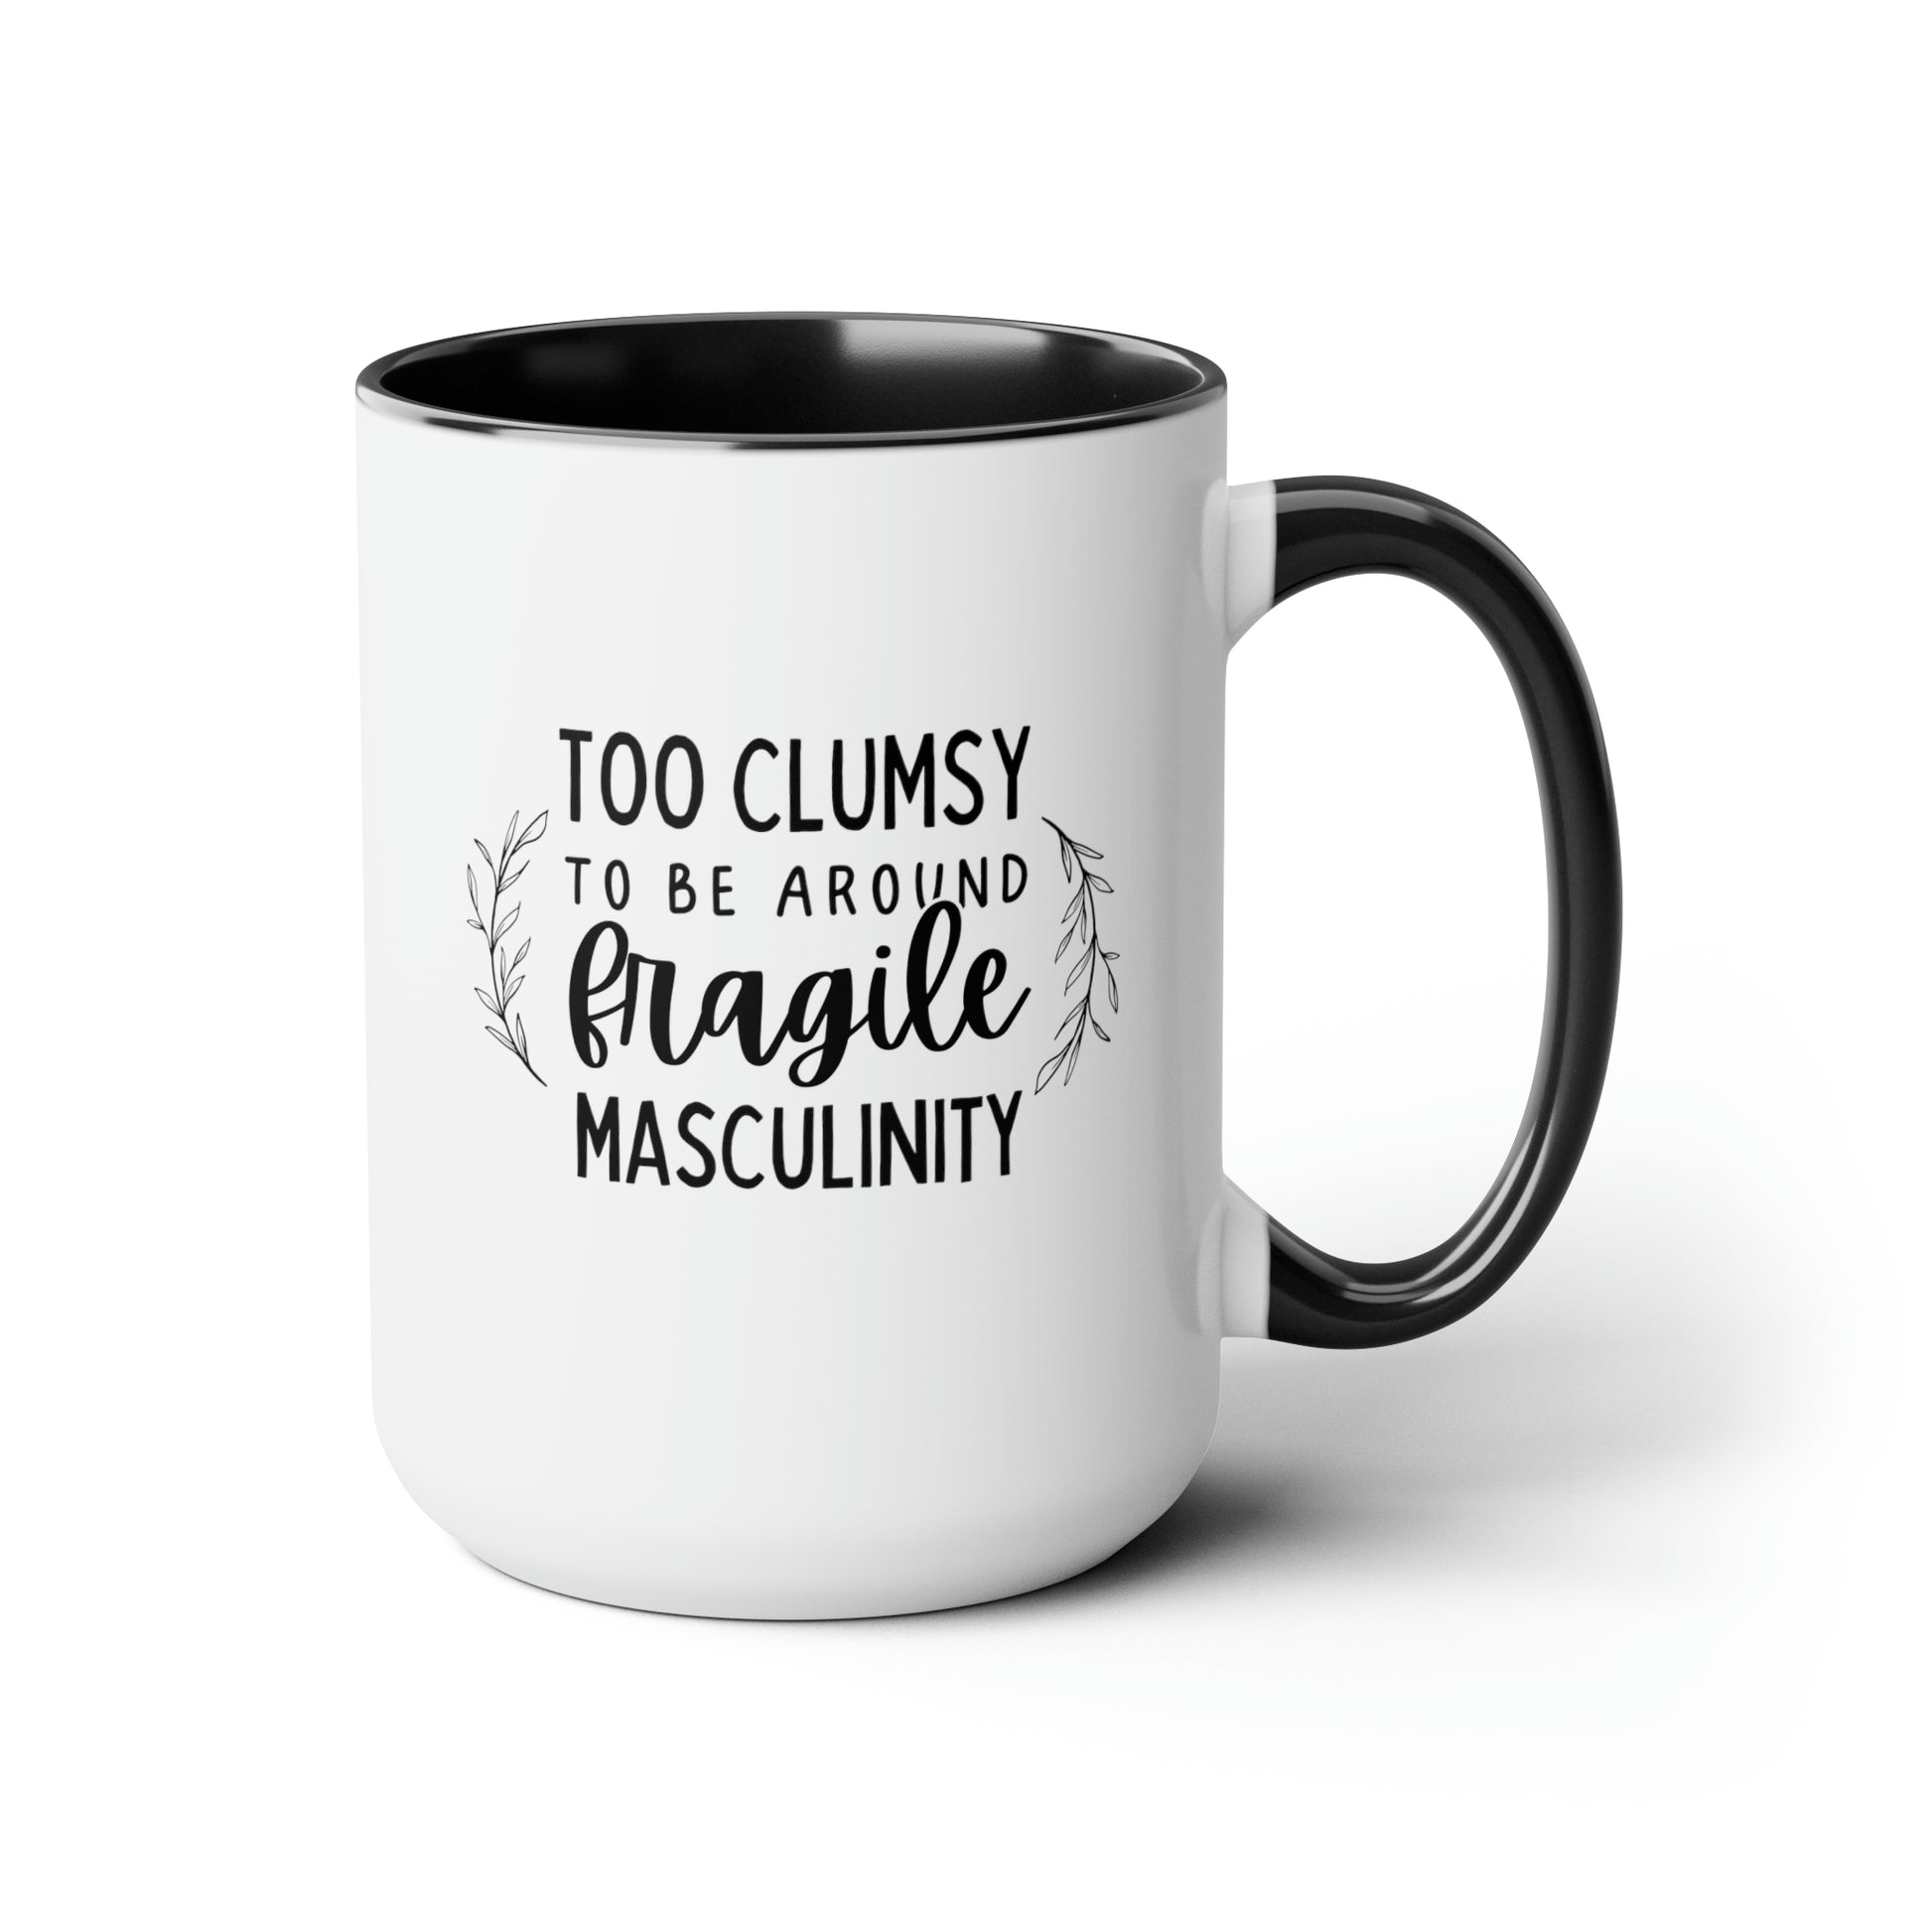 Too Clumsy to be Around Fragile Masculinity 15oz white with black accent funny large coffee mug gift for women feminist feminism waveywares wavey wares wavywares wavy wares